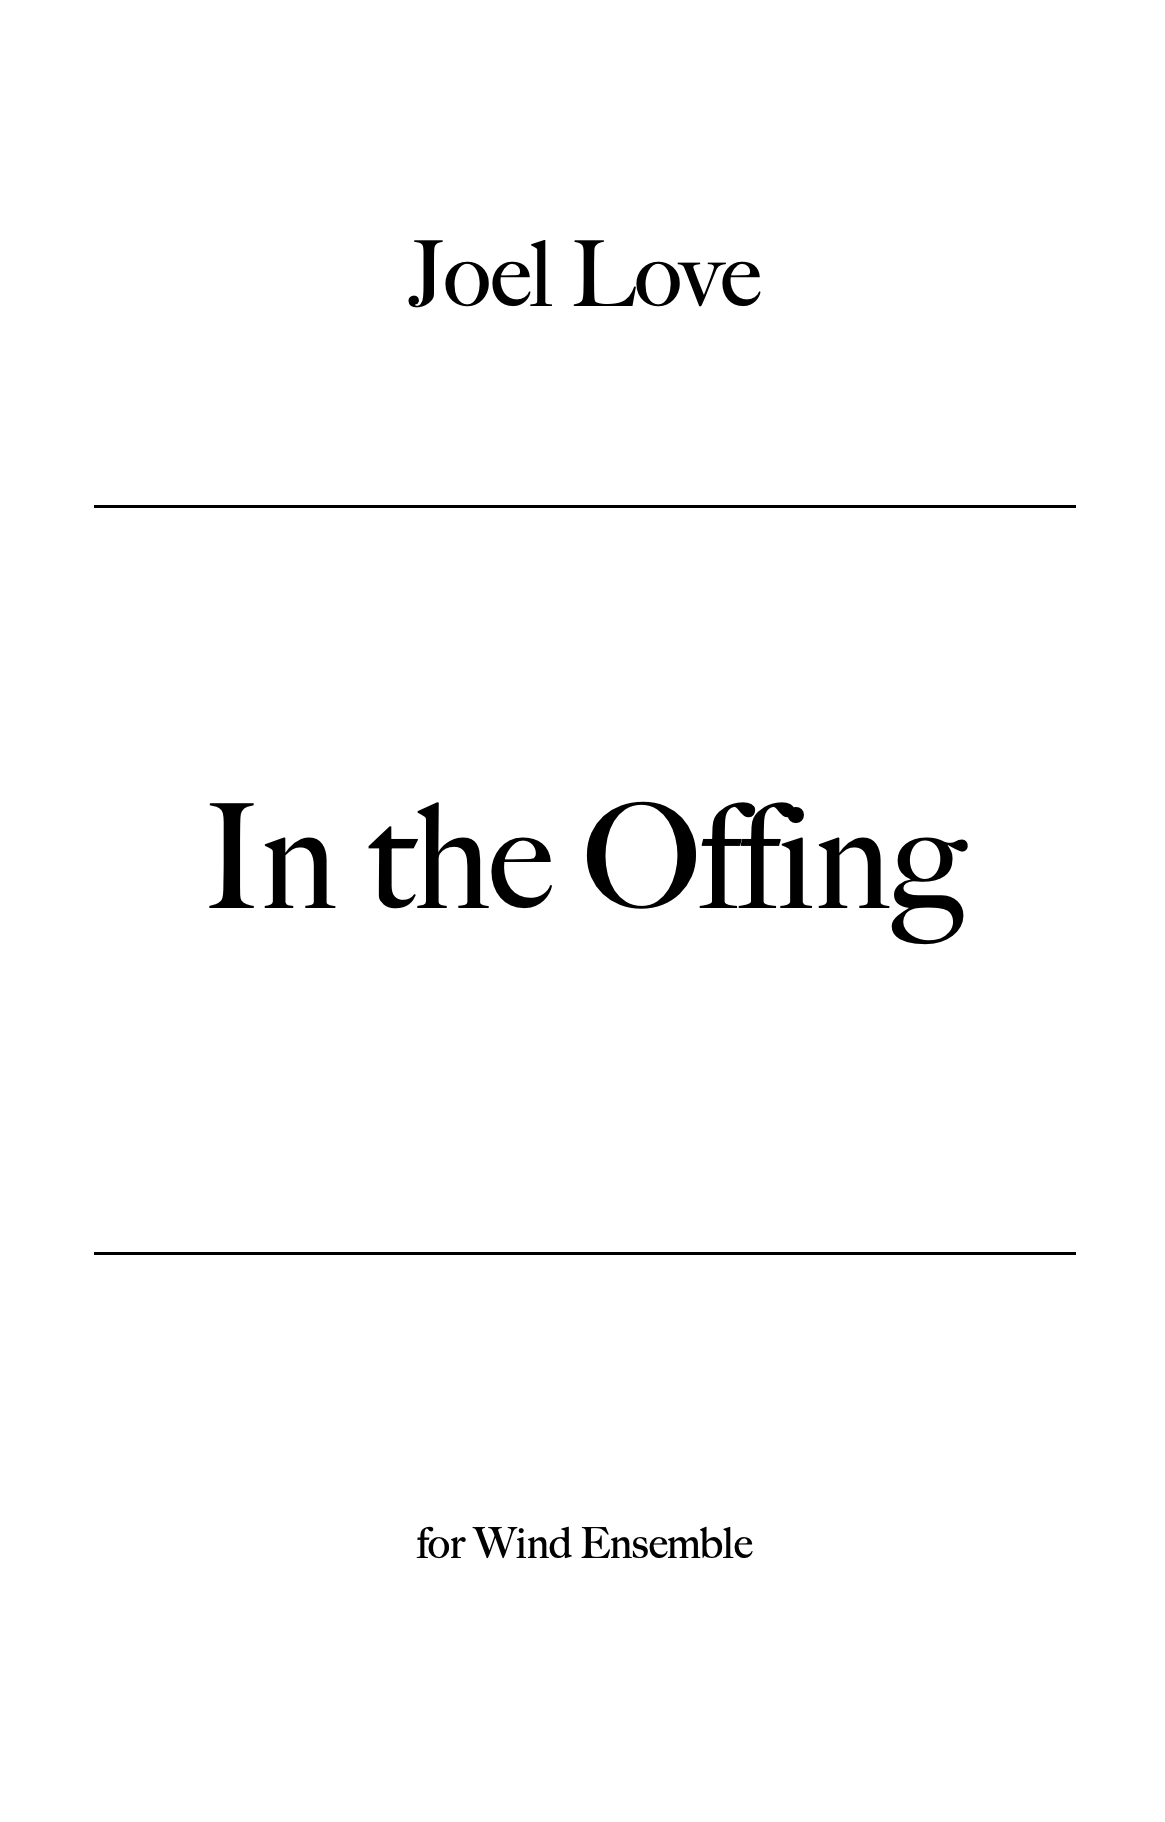 In The Offing by Joel Love